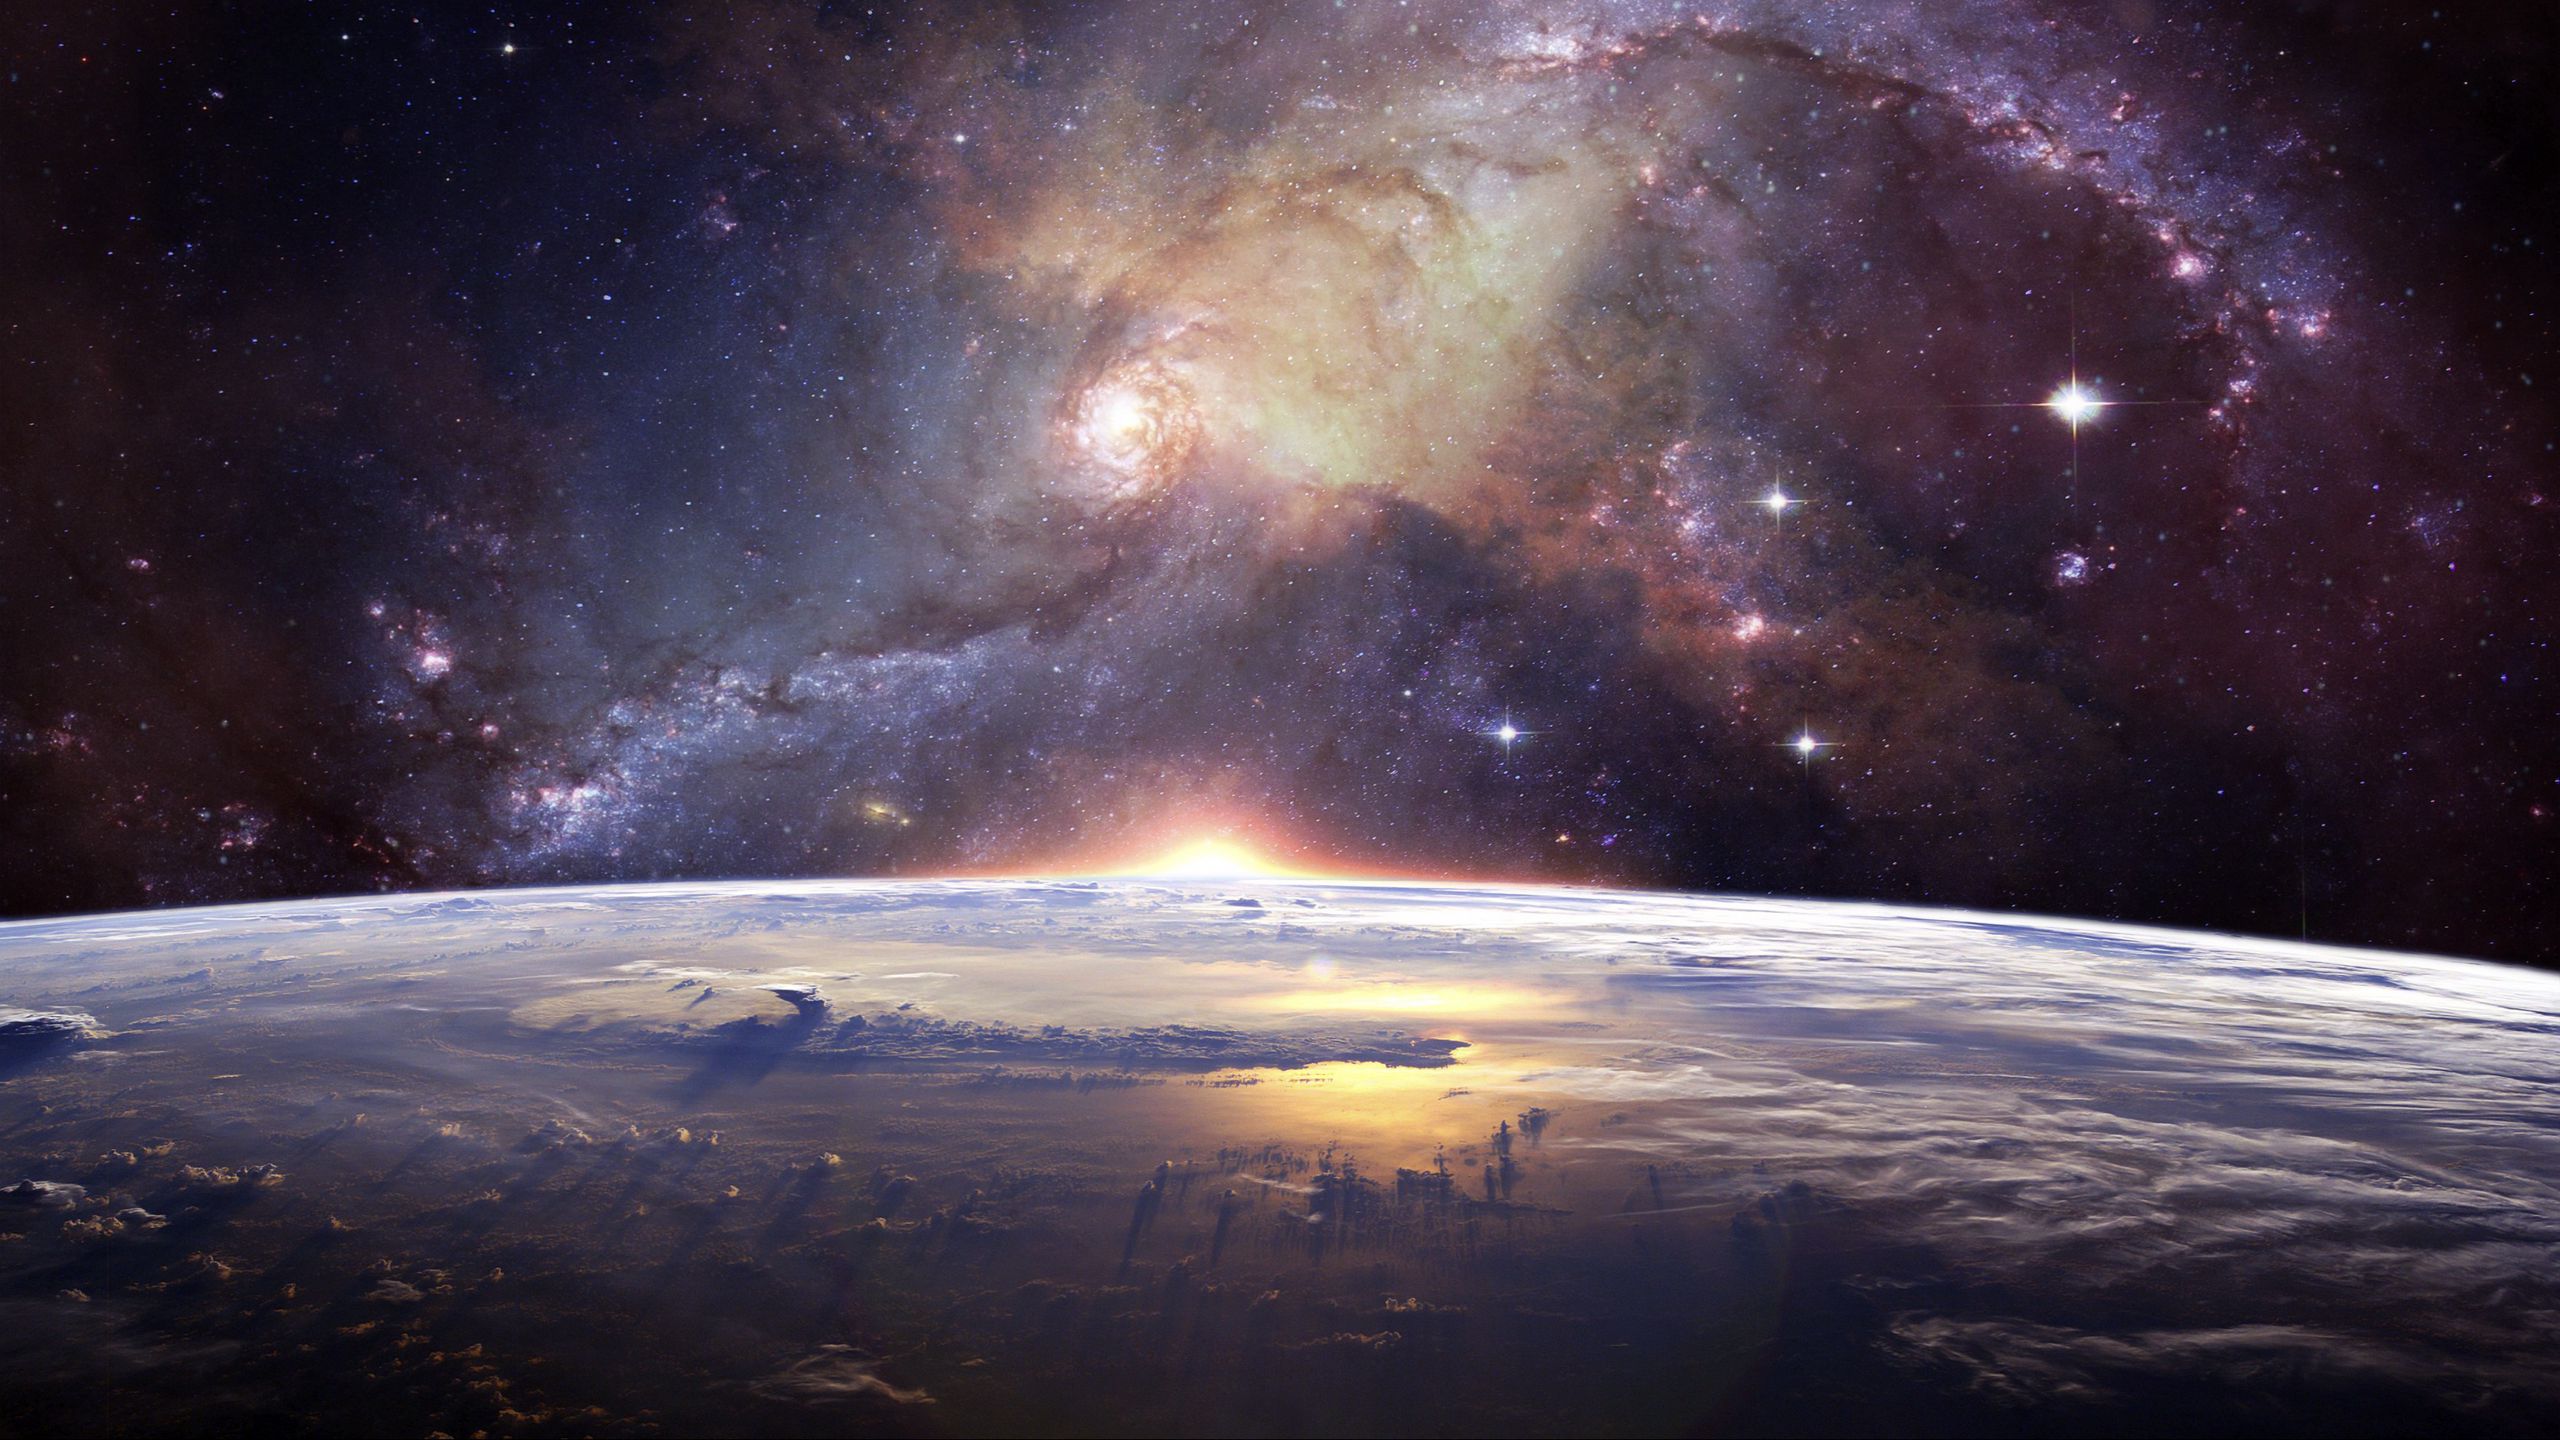 Download wallpaper 2560x1440 galaxy, universe, stars, space widescreen 16:9 HD background